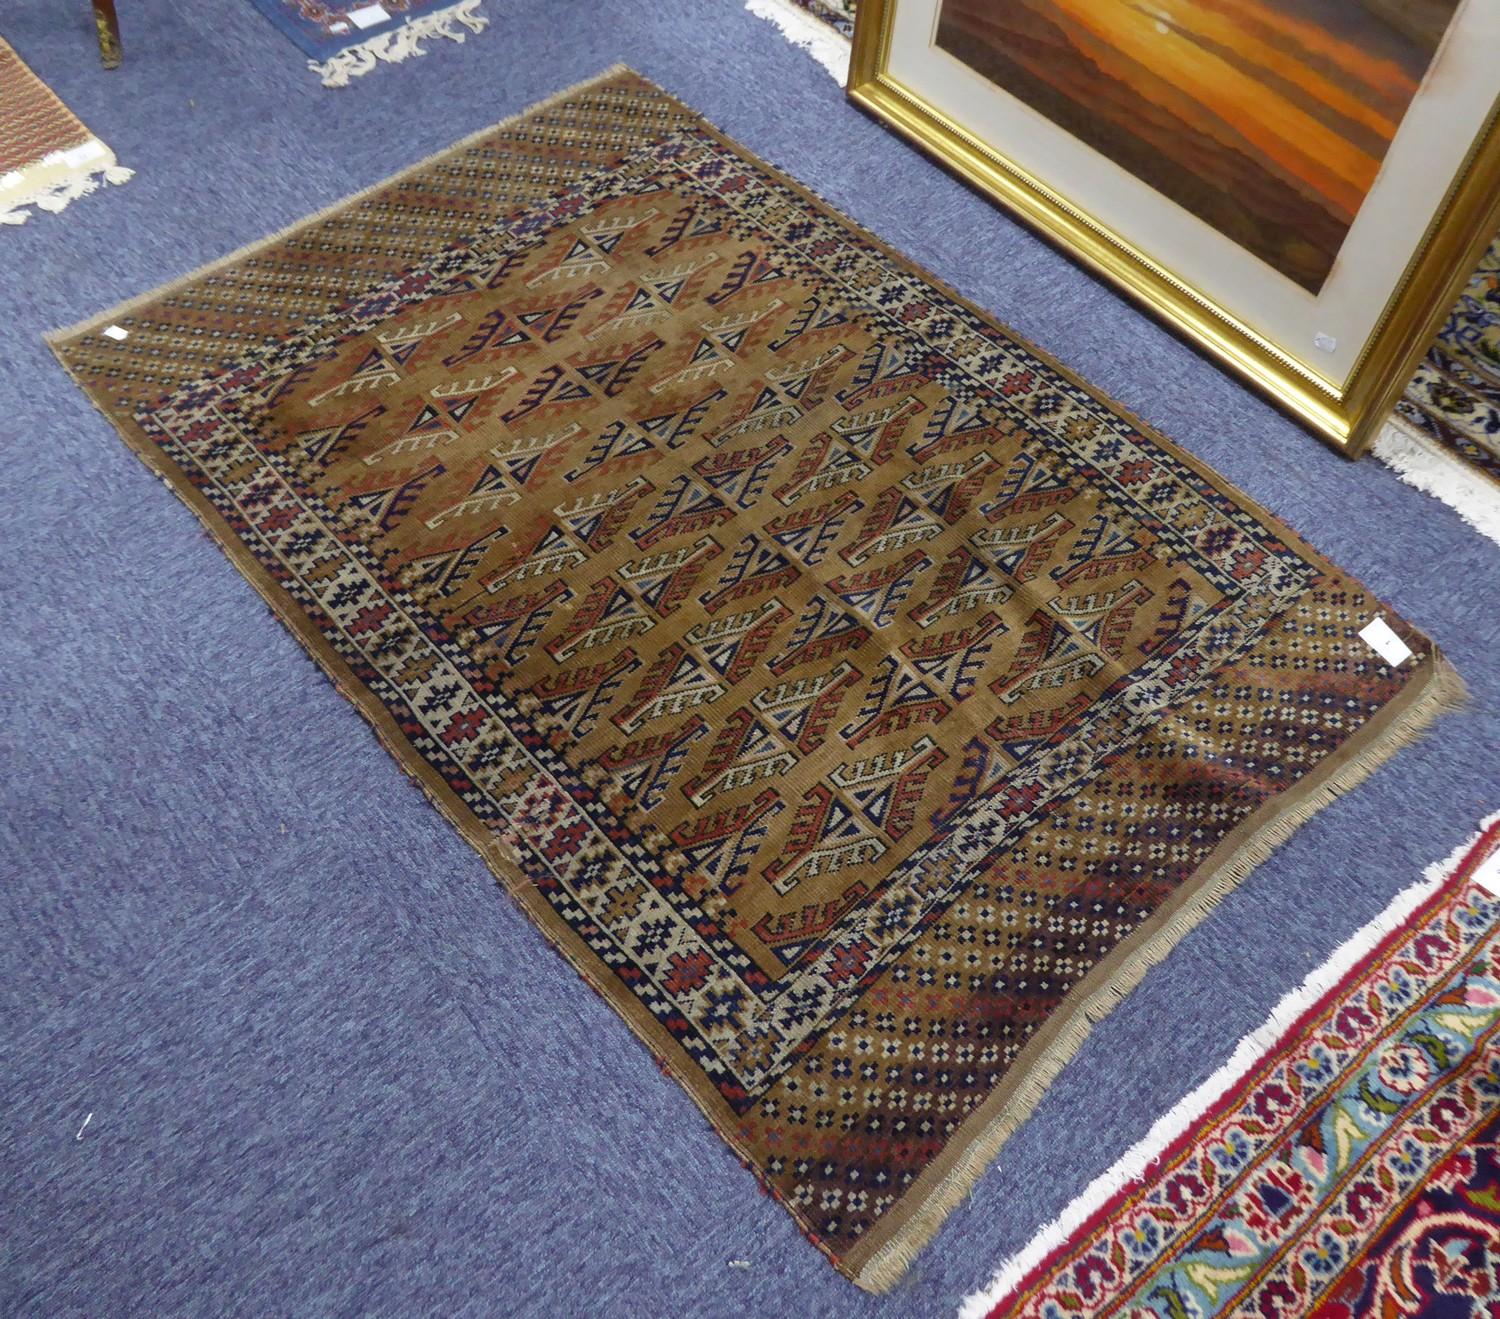 OLD TURKOMAN BOKHARA RUG, with five rows of guls on a faded brown field, white and patterned